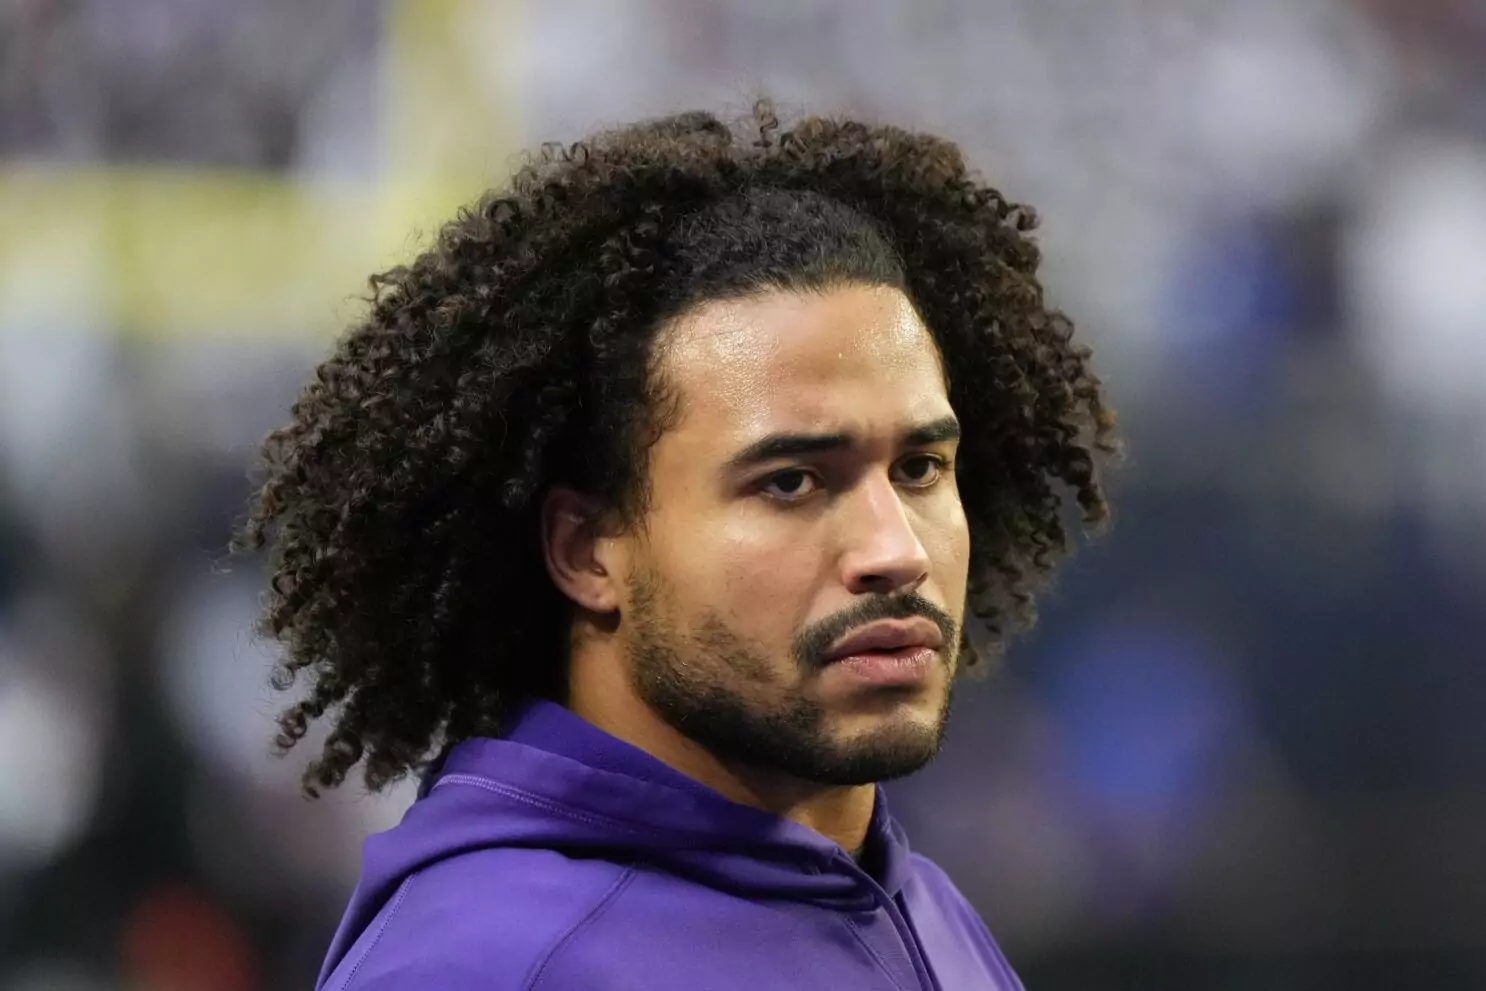  Eric Kendricks' Strategic Move to the Dallas Cowboys Reuniting with Mike Zimmer